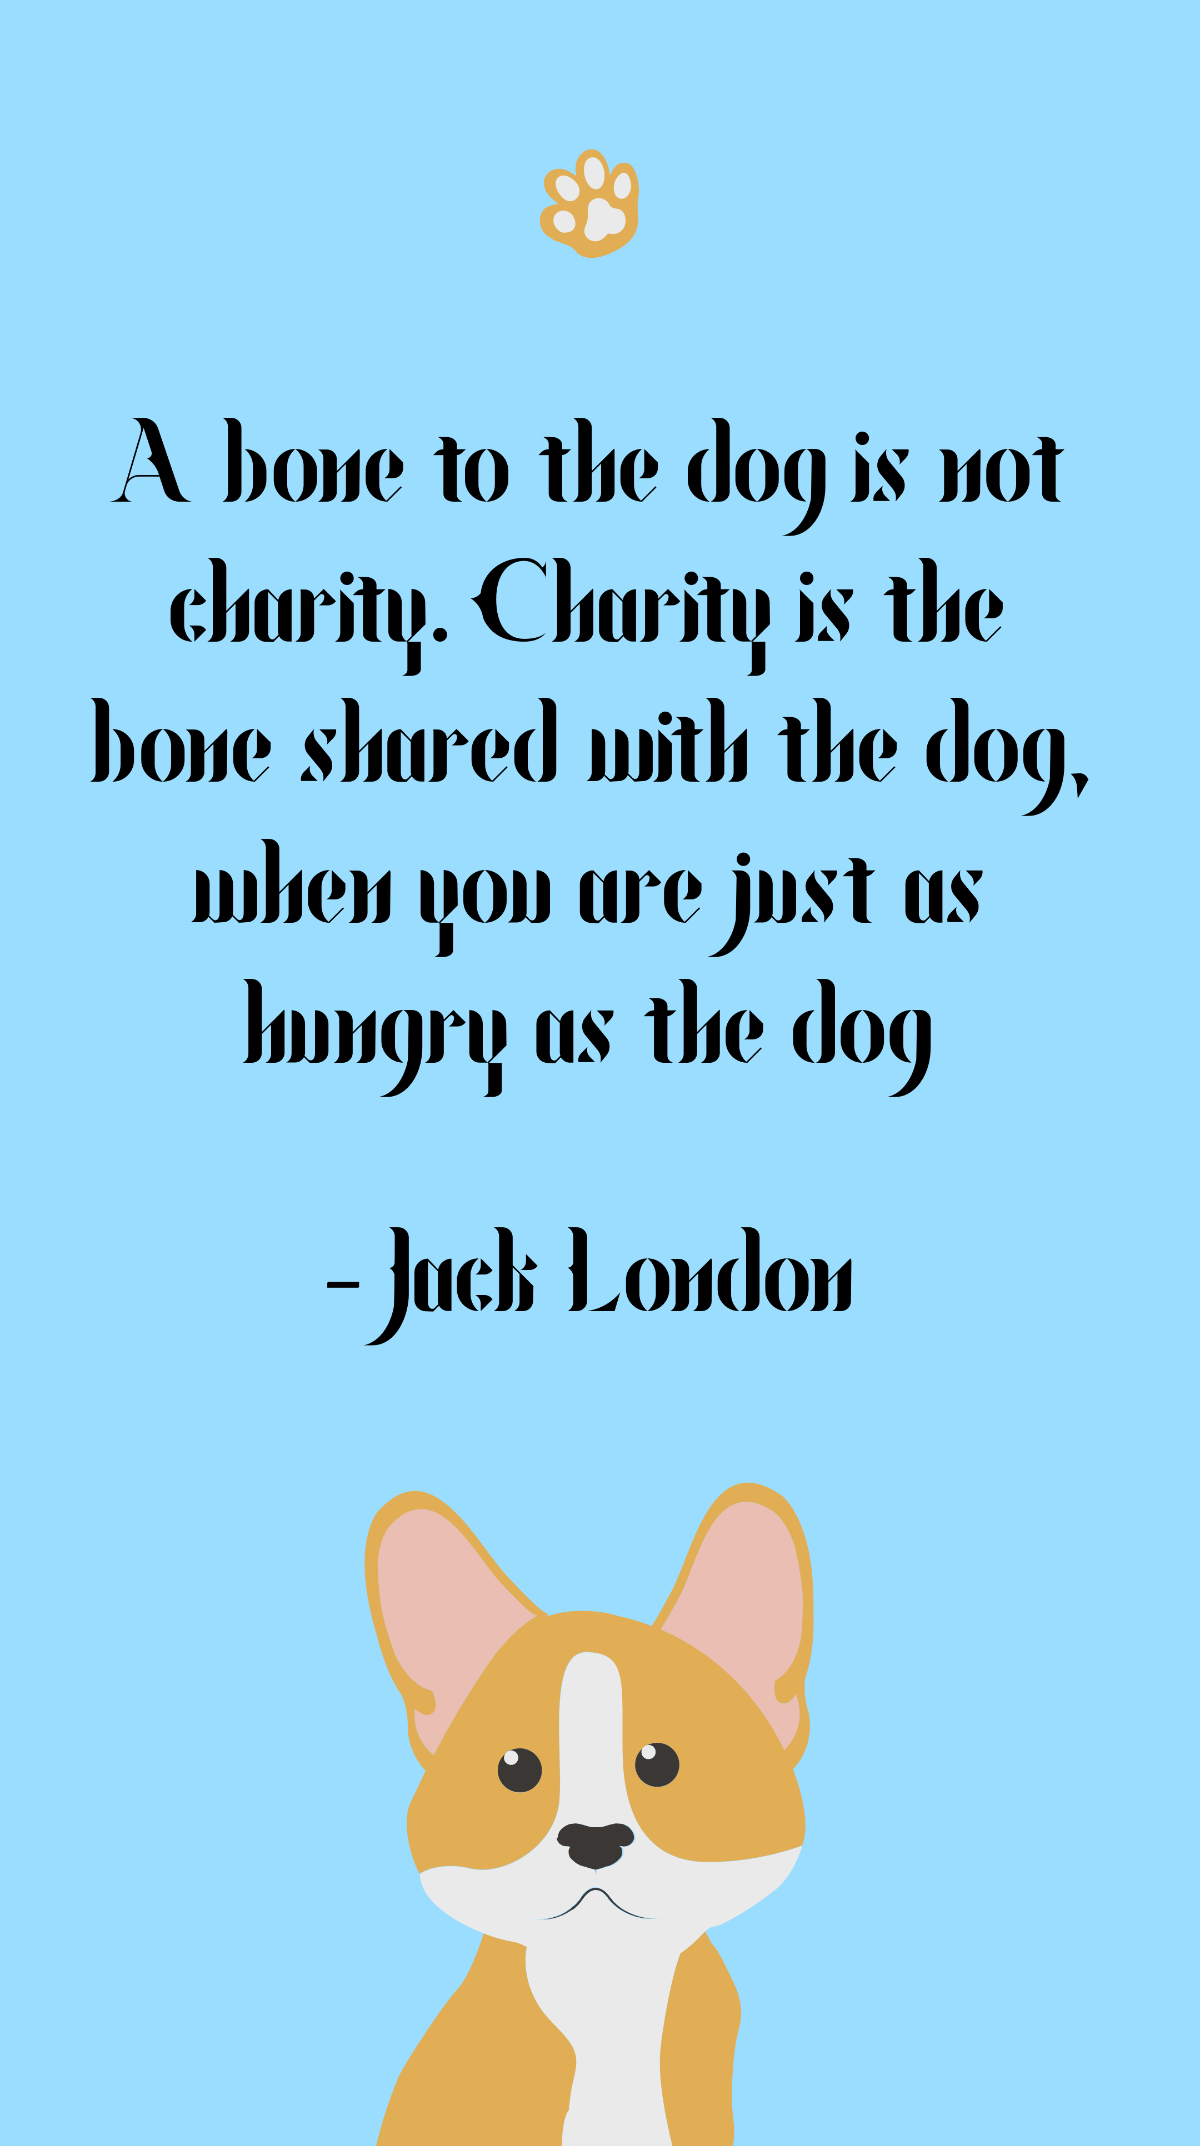 Free Jack London - A bone to the dog is not charity. Charity is the bone shared with the dog, when you are just as hungry as the dog Template